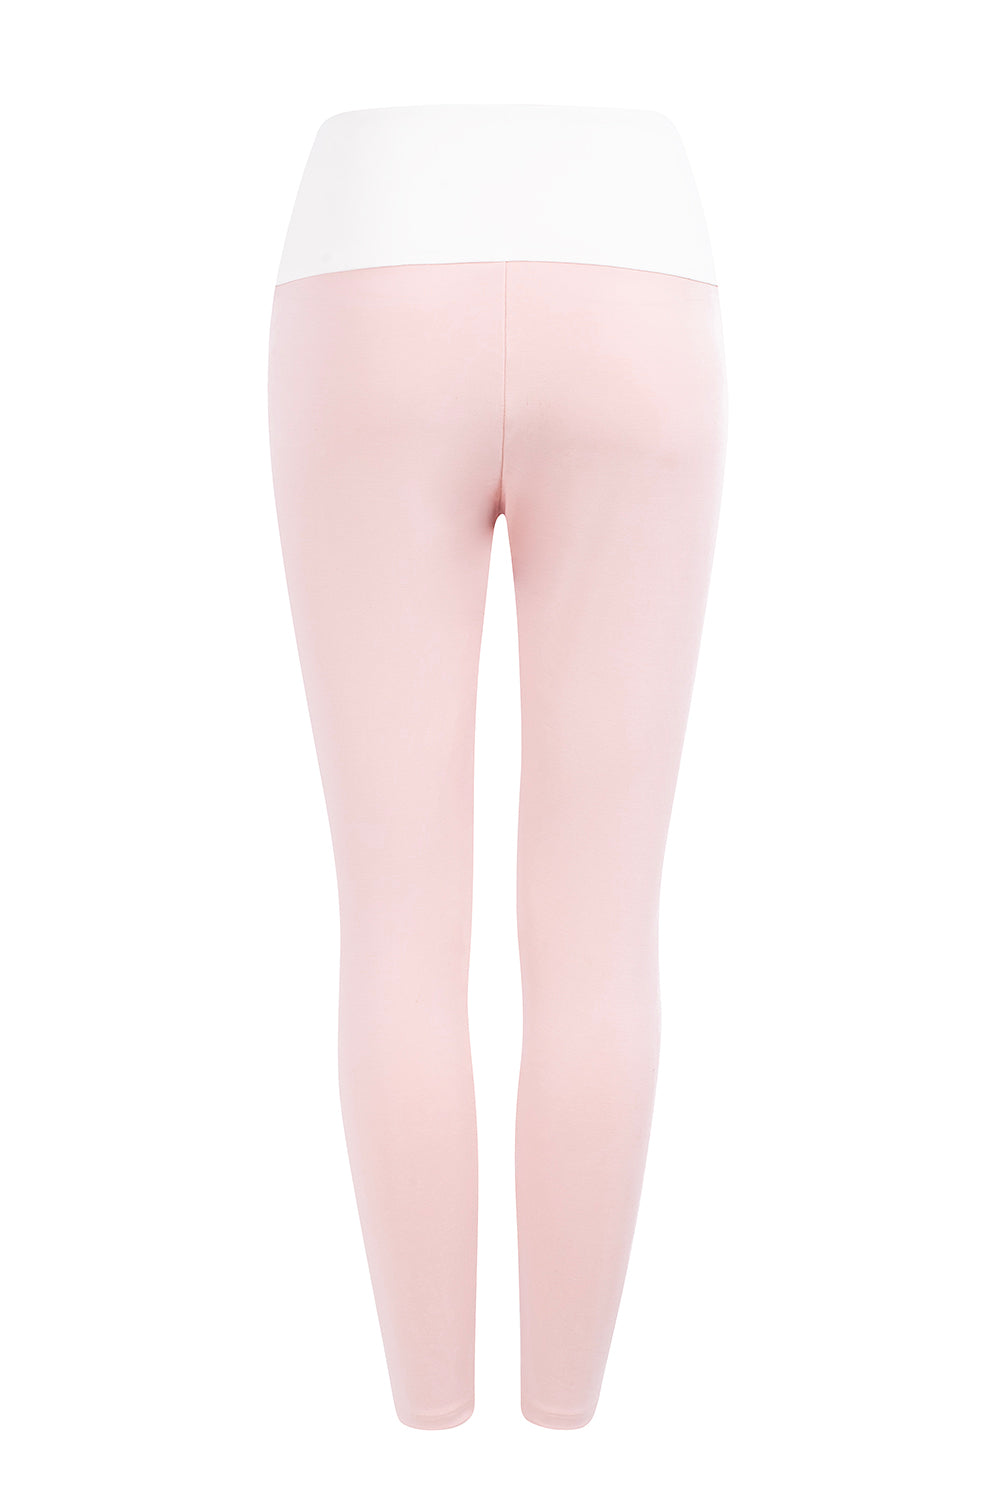 SOFT TOUCH PINK LEGGINGS